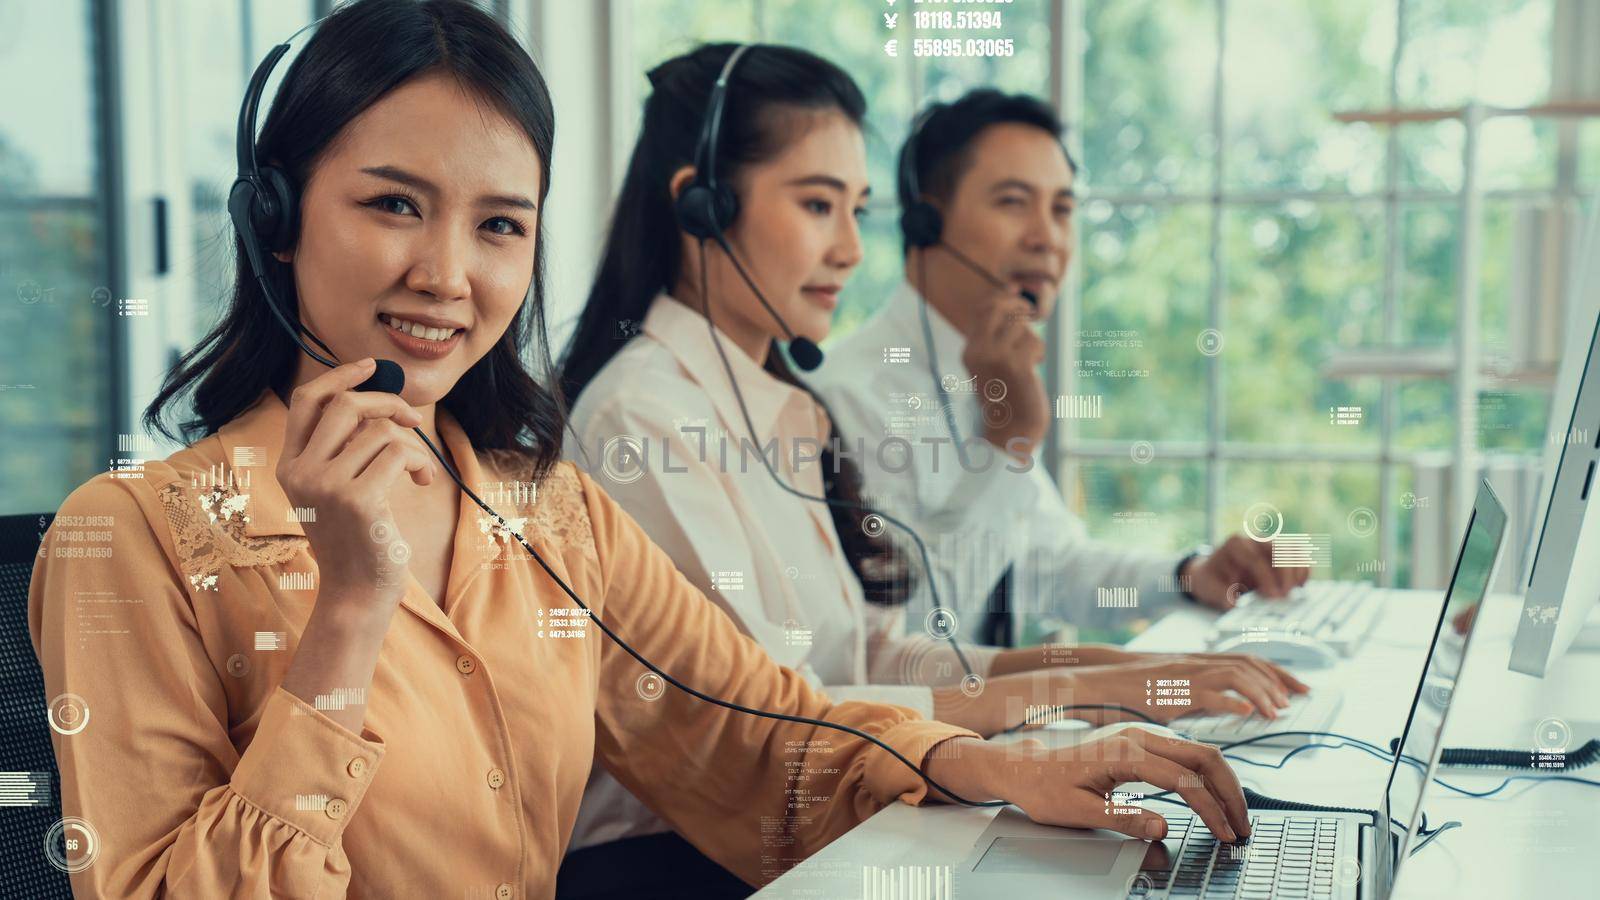 Customer support call center provide data with envisional graphic by biancoblue